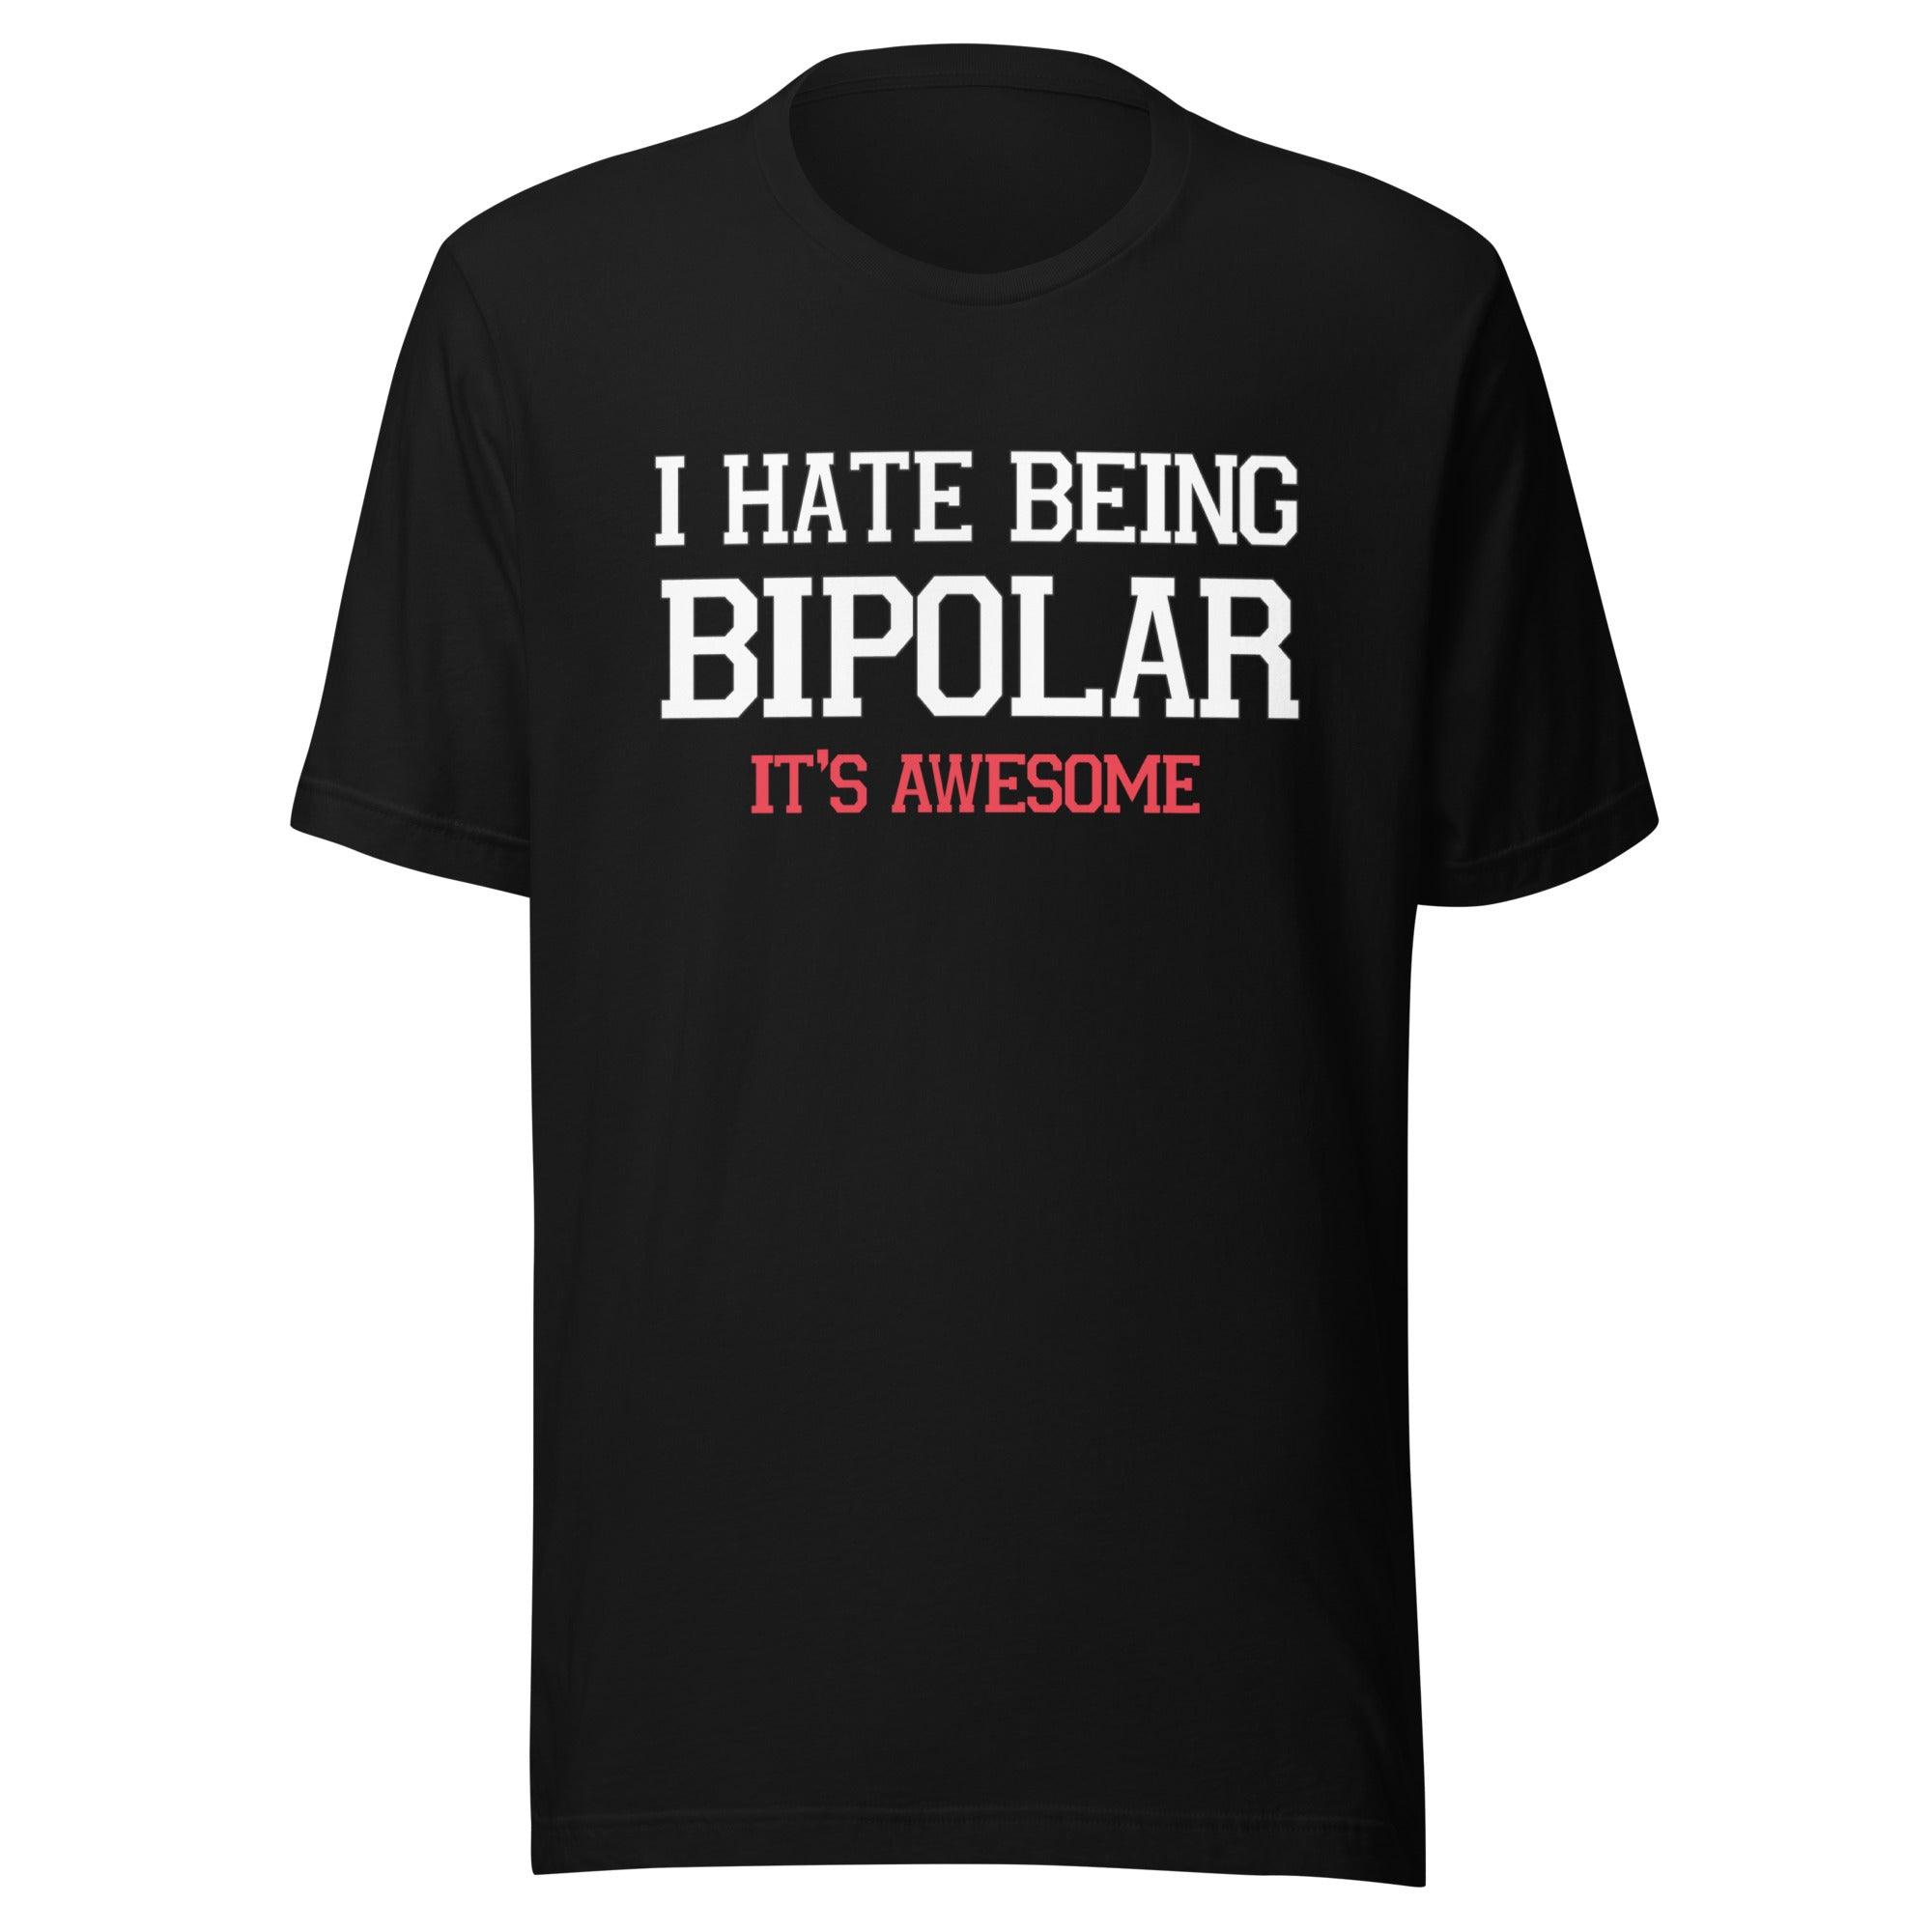 I Hate Being Bi-Polar It's Awesome Top Koala Sofstyle Unisex Tee